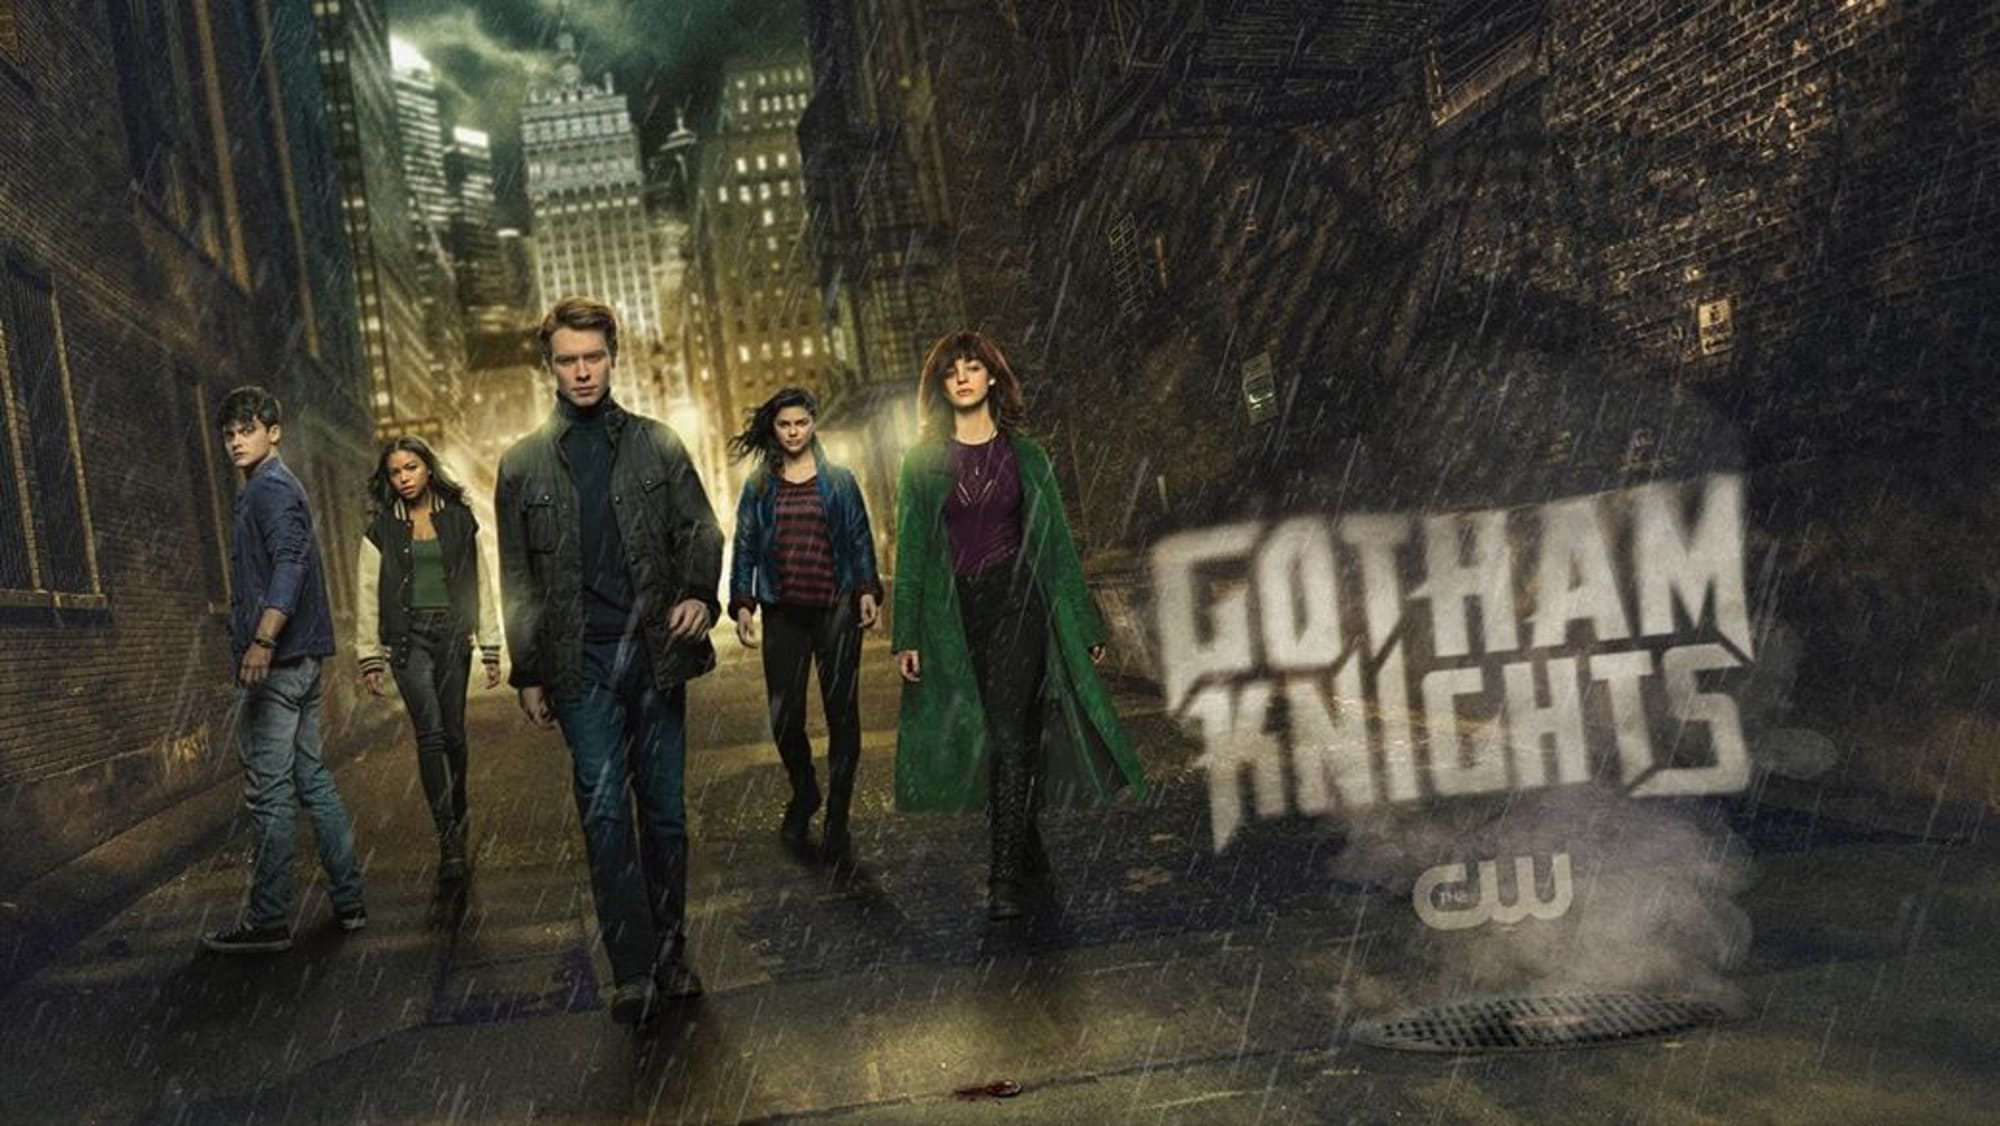 Gotham Knights is coming to The CW in October, 2022